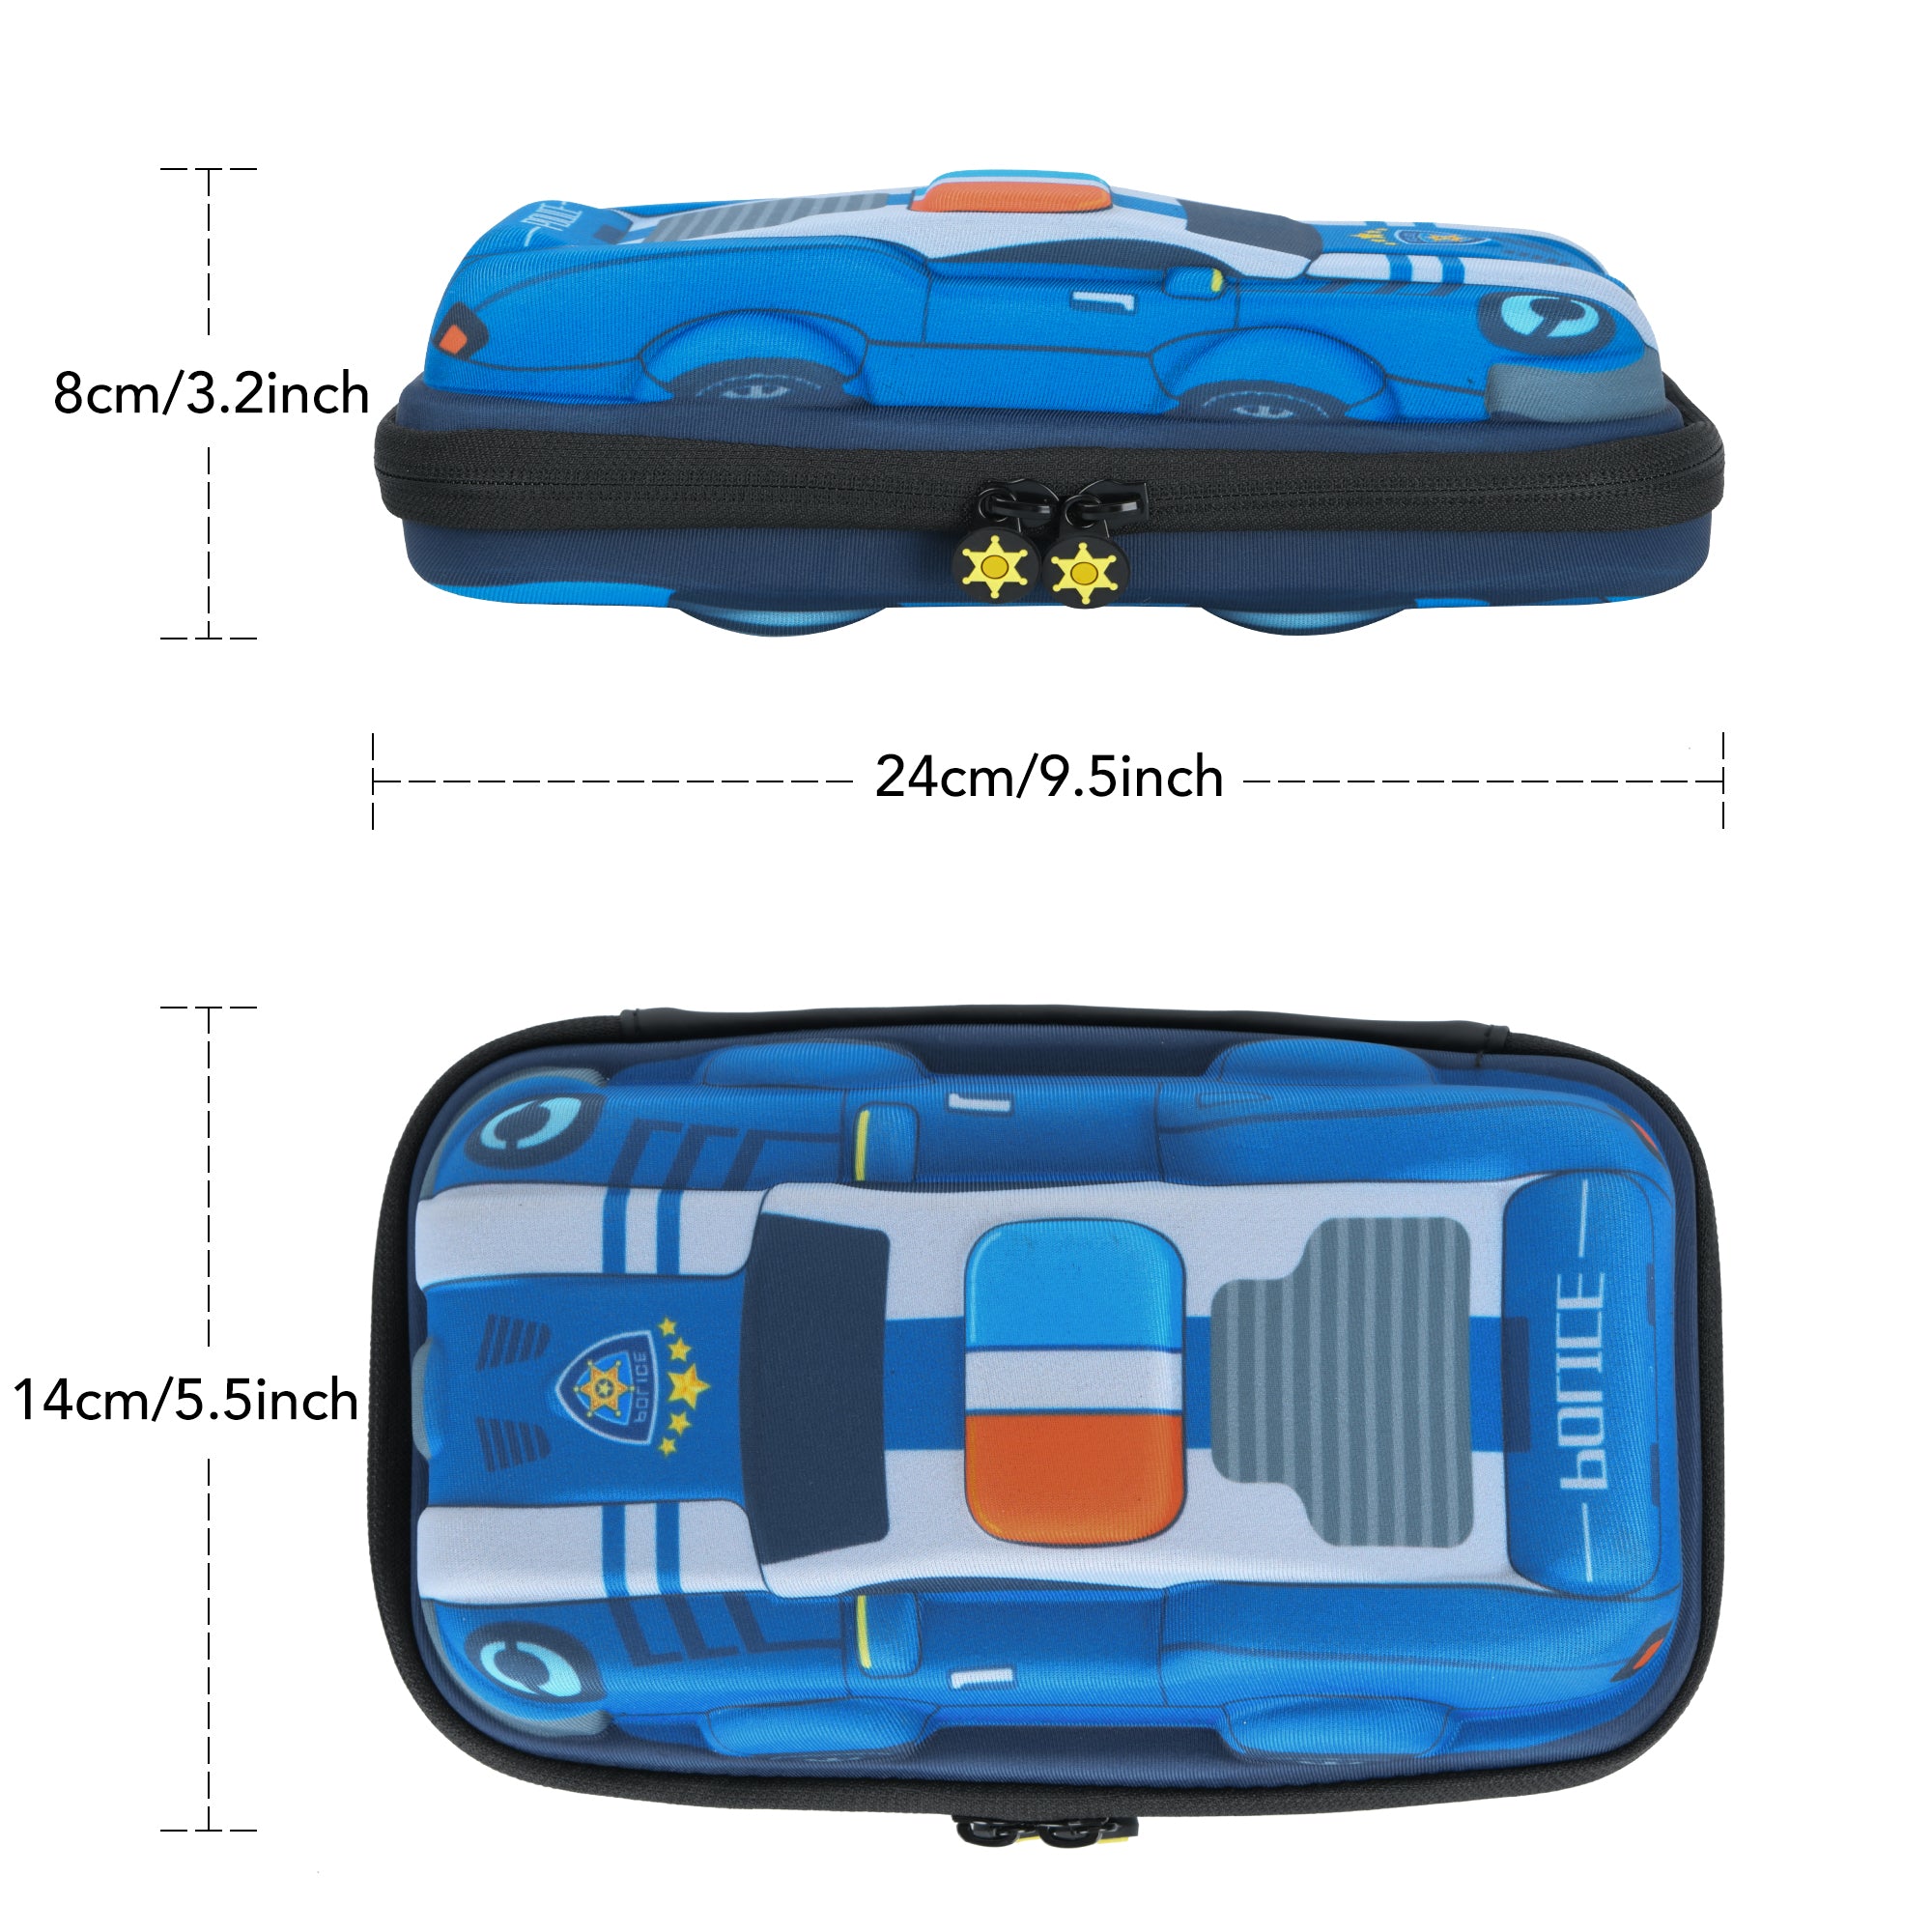 Rockpapa Police Car Large Pencil Cases, Big Pencil Case for Boys & Girls, Small Storage Box for School Students Boys Teens Kids Toddlers